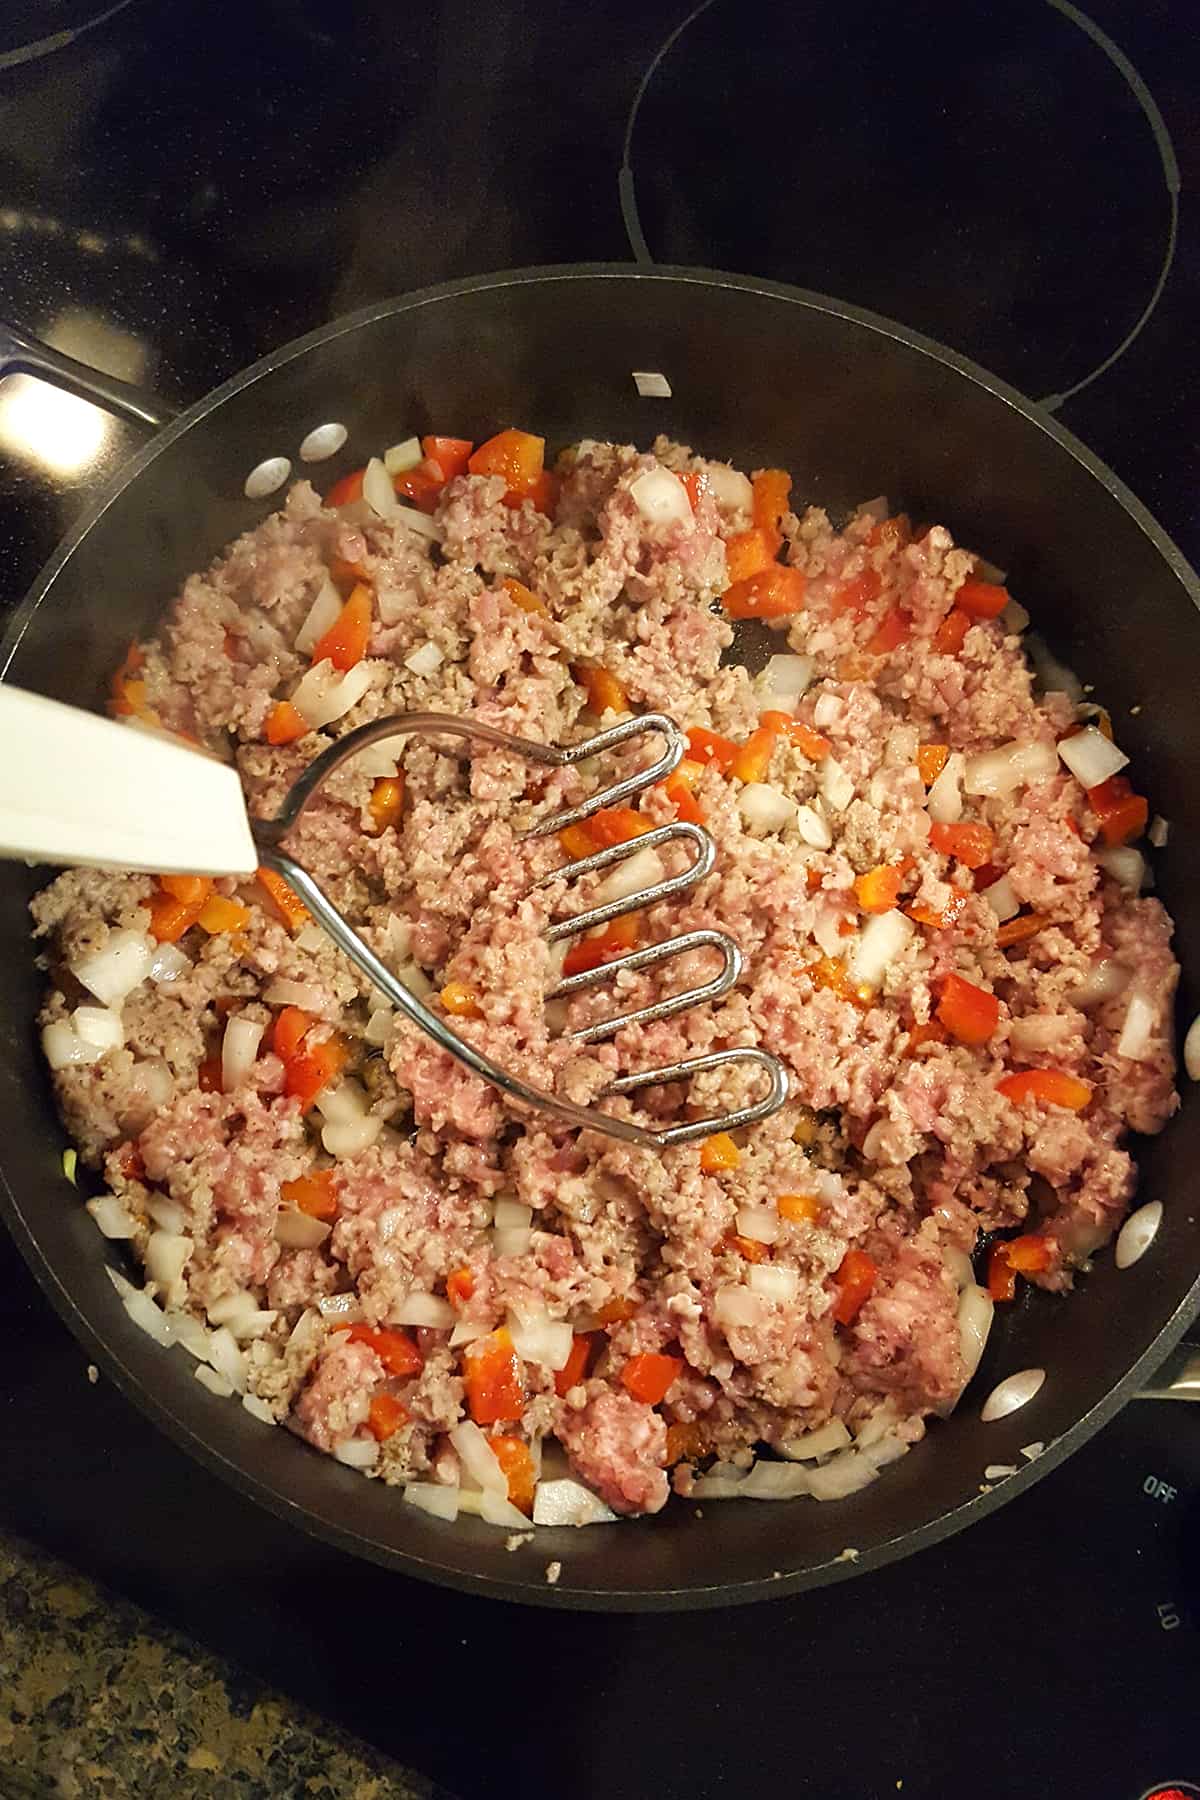 Onions, peppers, and sausage in a skillet with a potato masher breaking up the sausage meat.